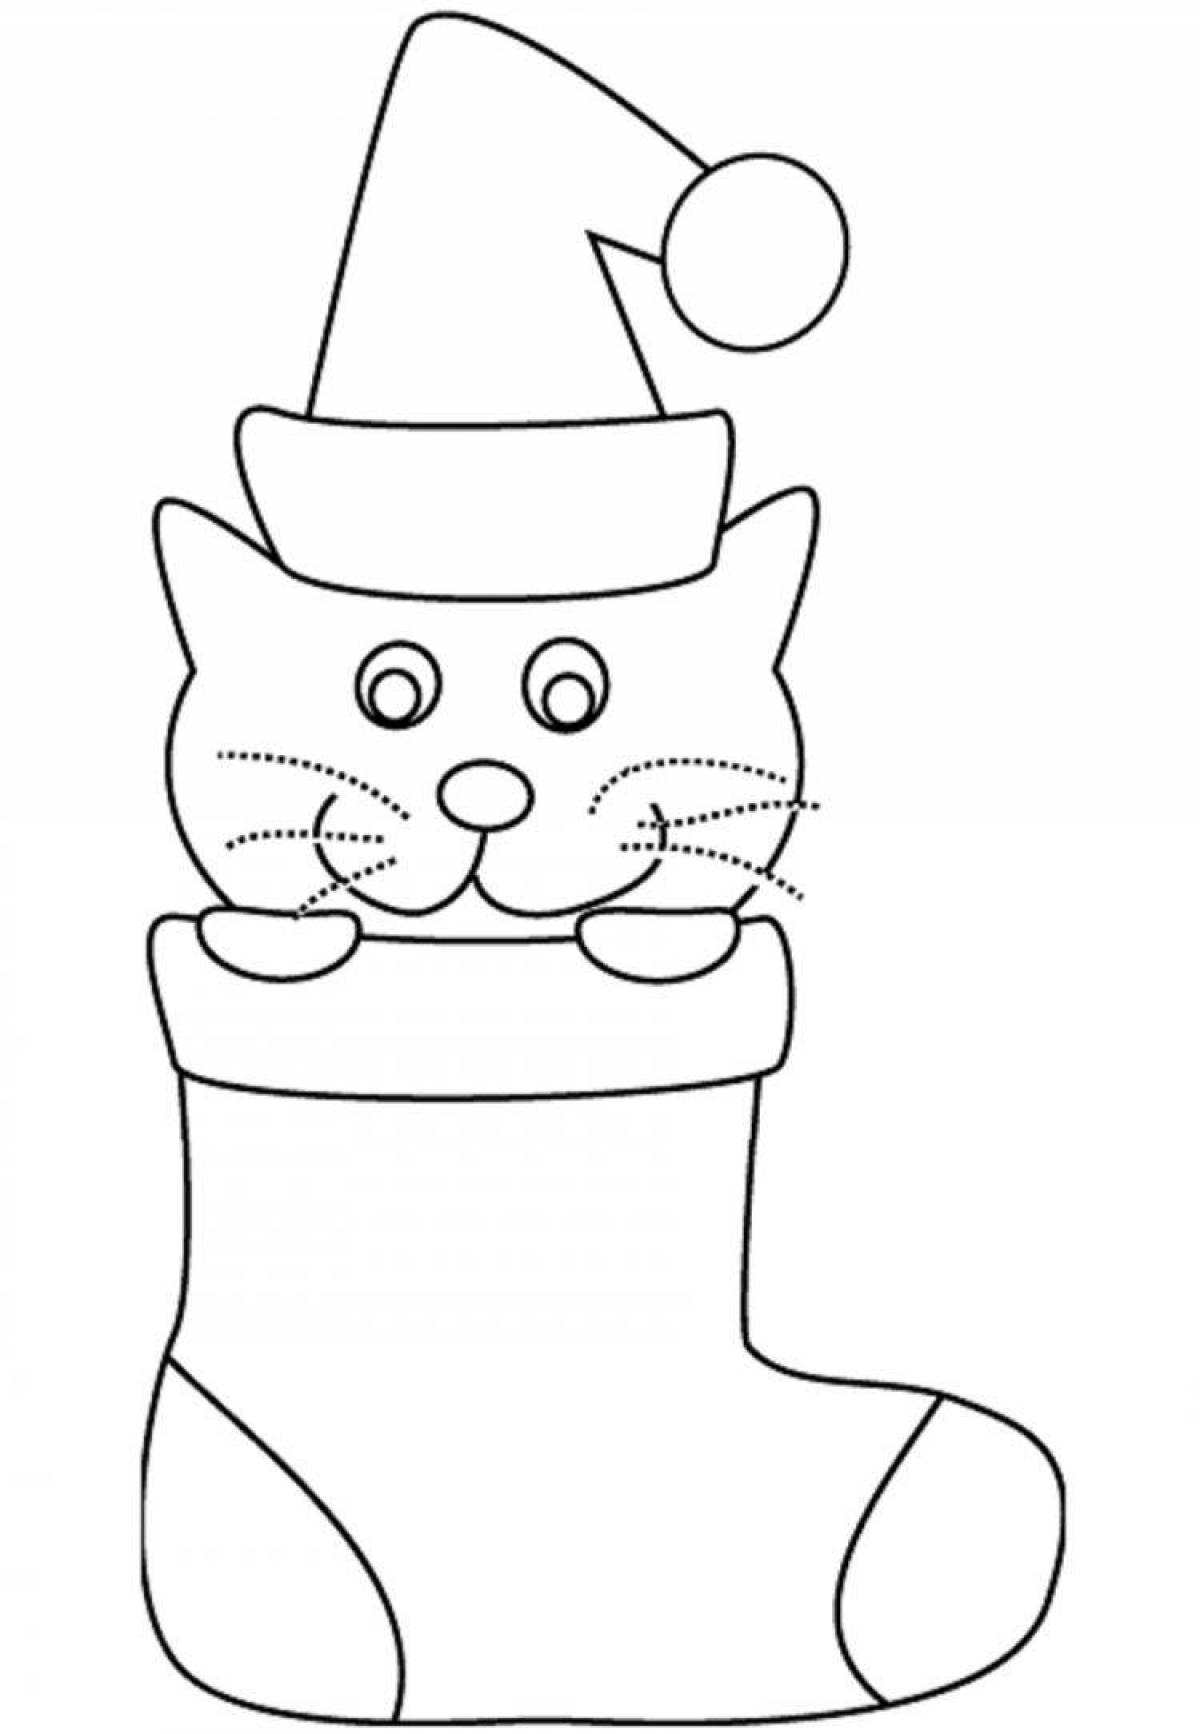 Animated cat in a hat coloring book